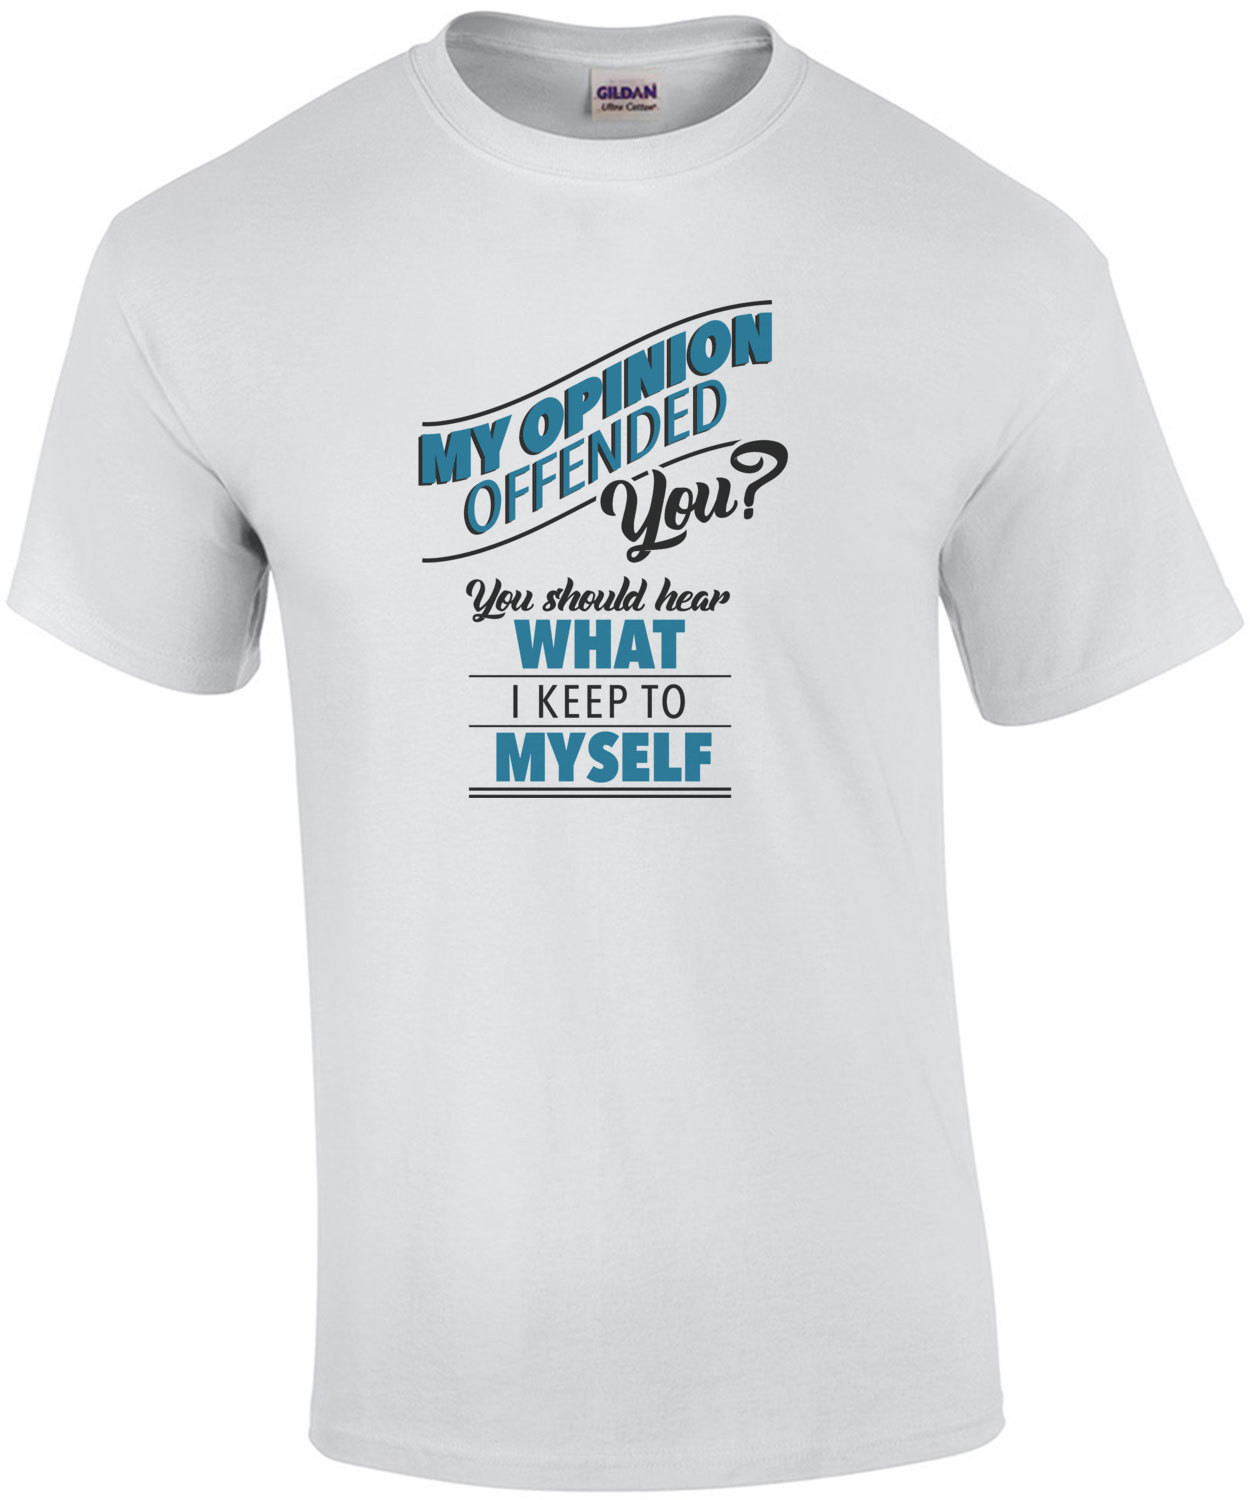 My opinion offended you? You should hear what I keep to myself - Funny sarcastic t-shirt